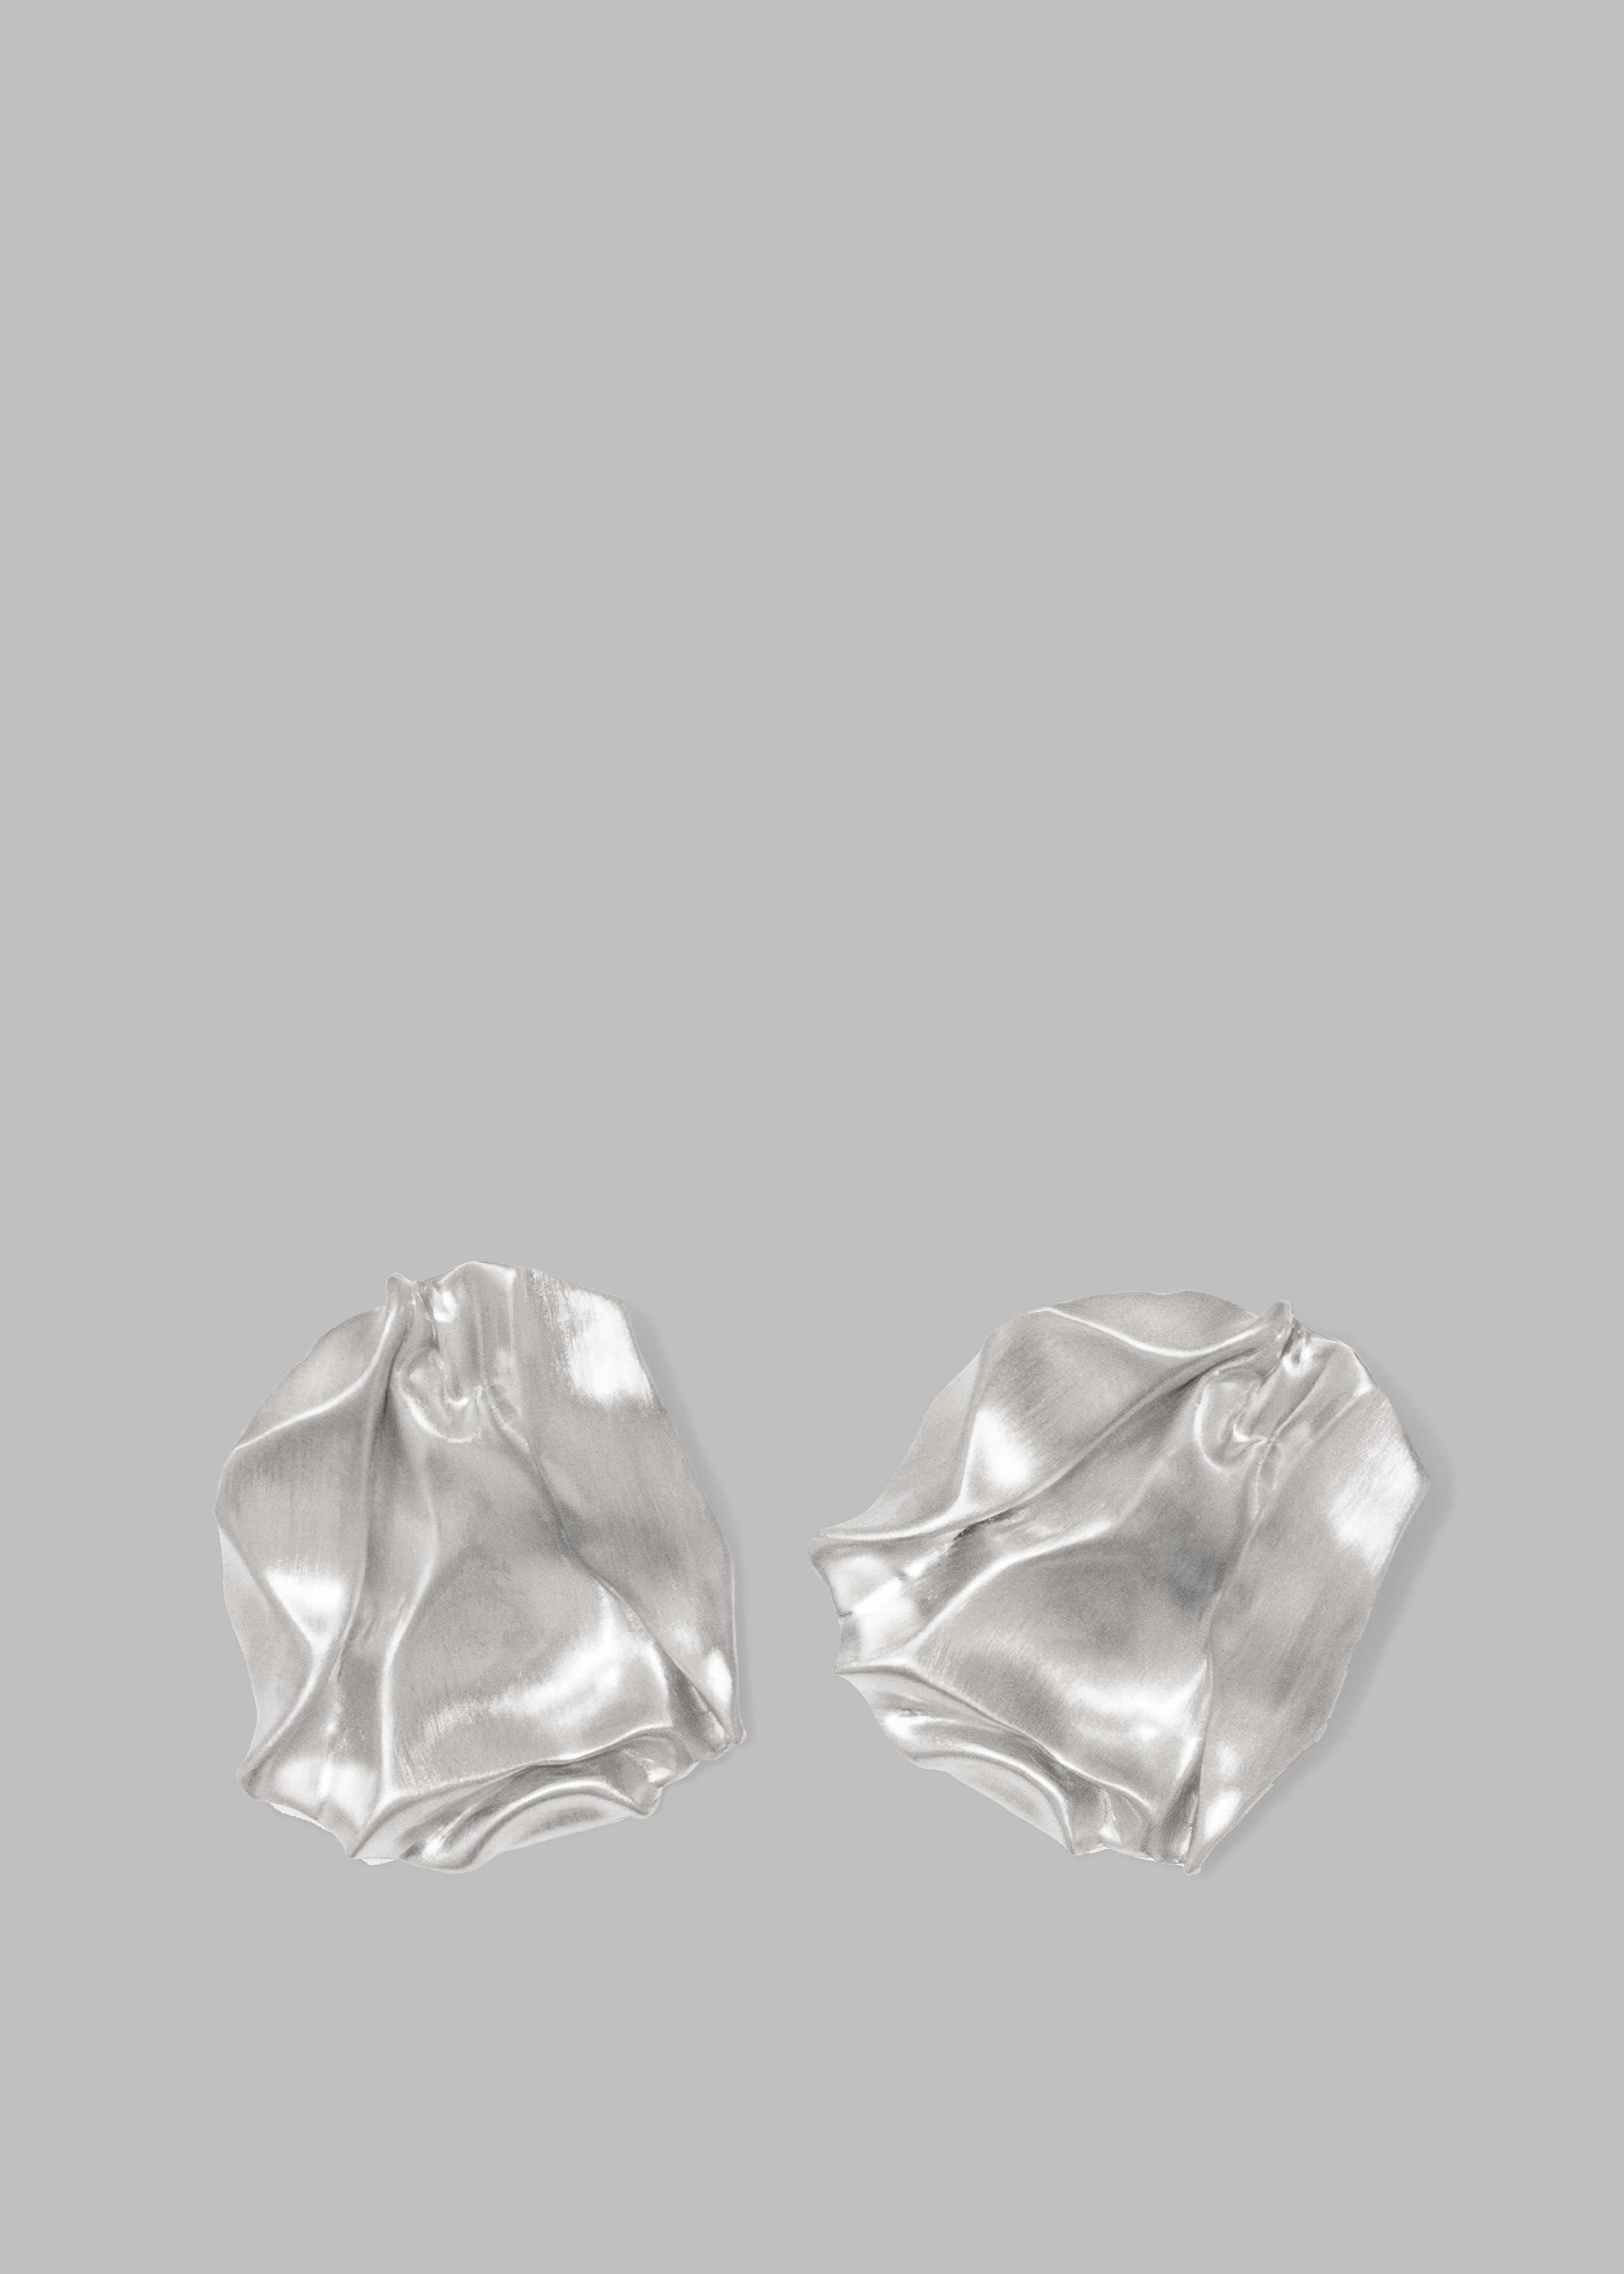 Completedworks Groundswell Earrings - Platinum - 1